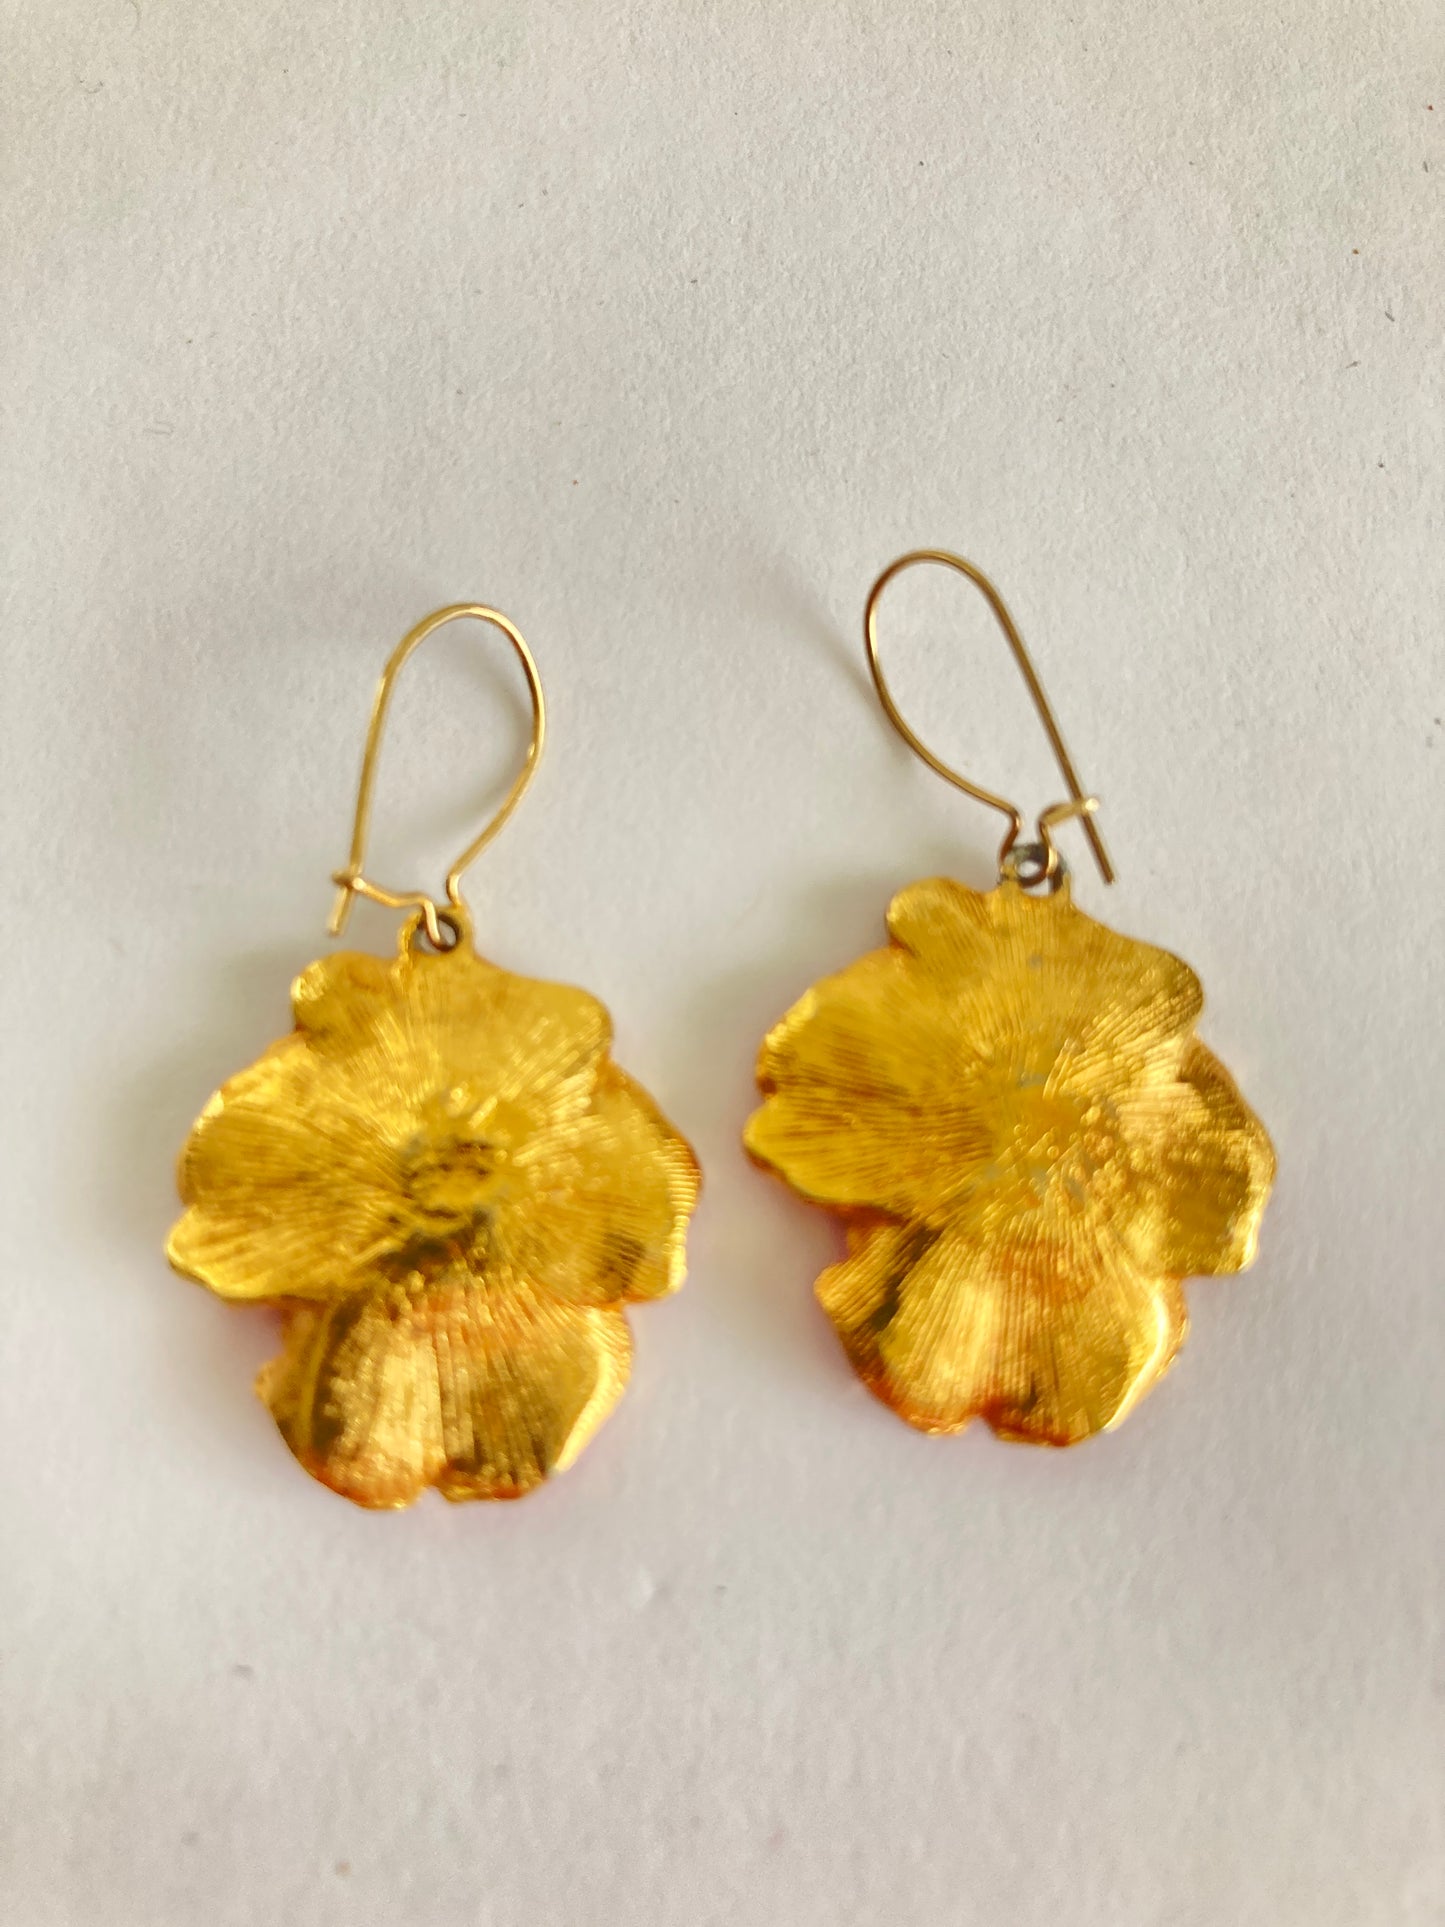 Red and Yellow Pansy Earrings With Pearl Centers